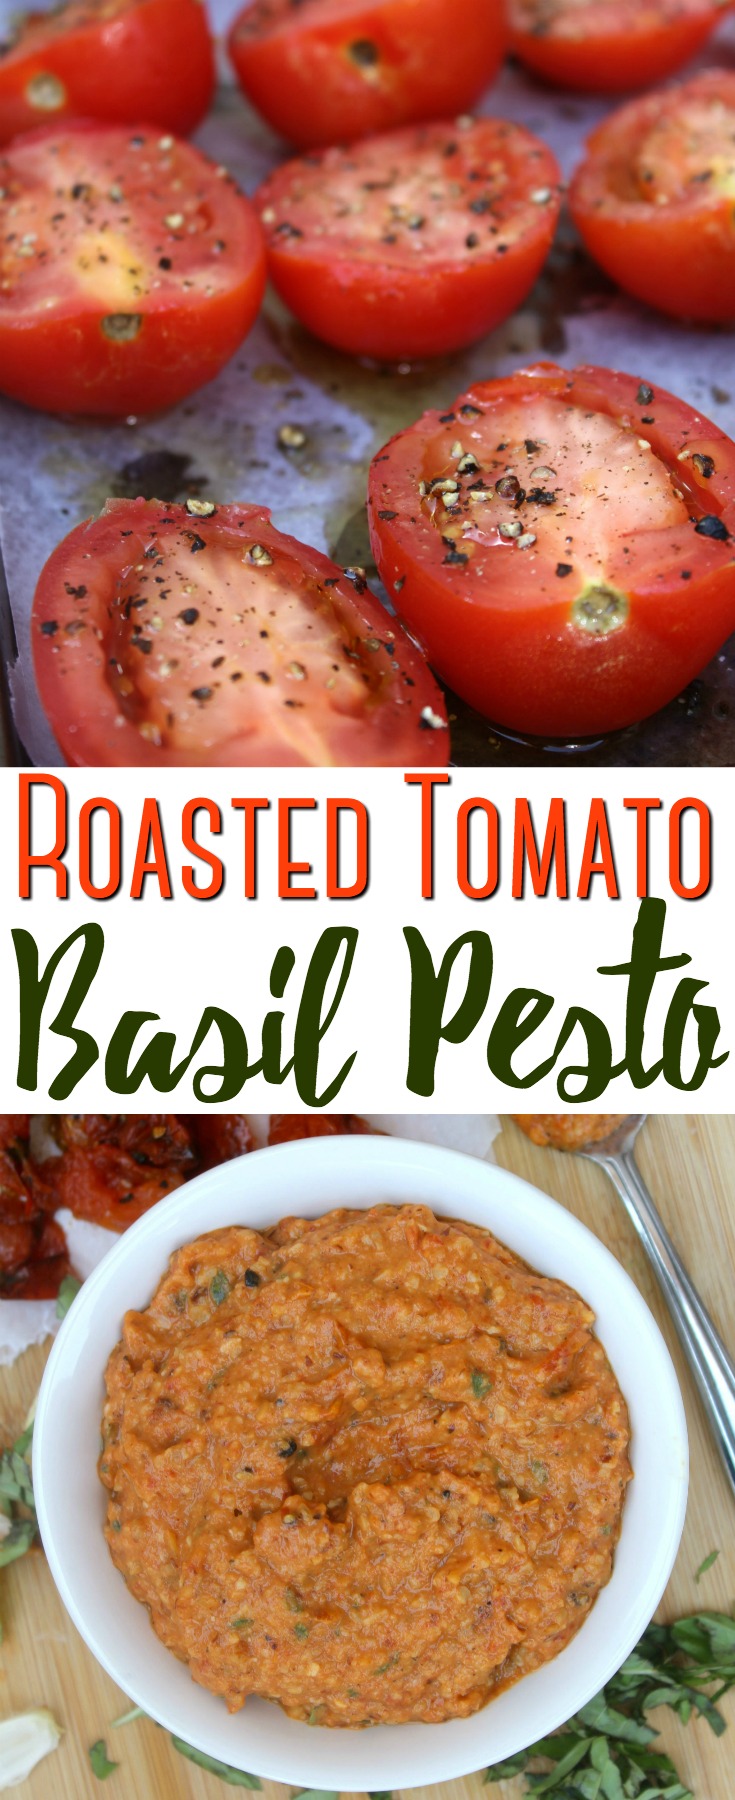 This creamy and rich roasted tomato basil pesto is packed with flavor and a wonderful way to use an abundance of seasonal tomatoes!